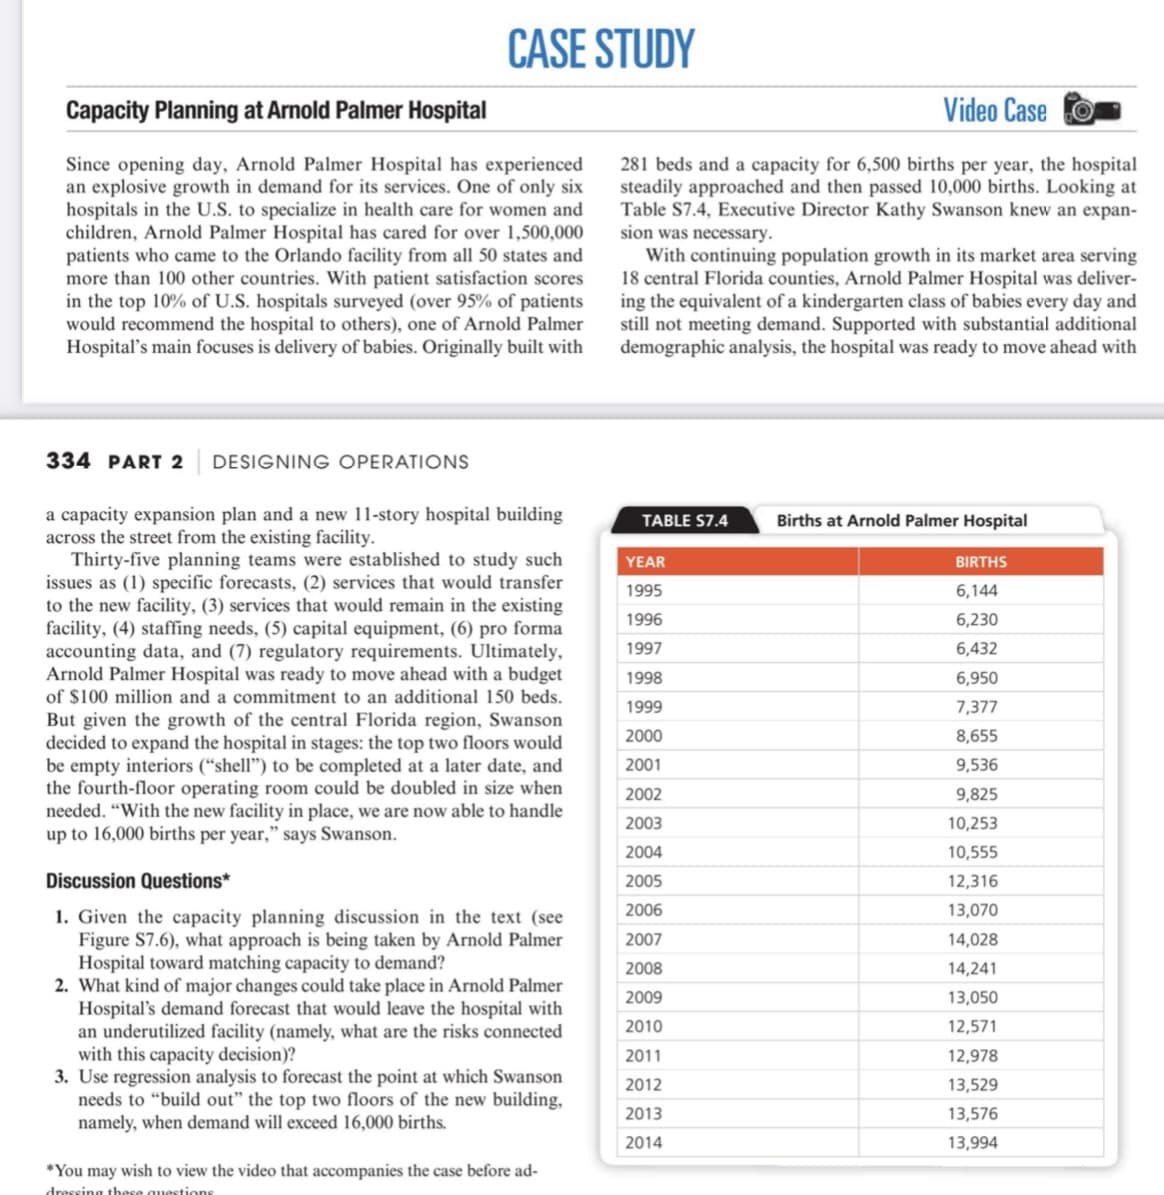 CASE STUDY
Capacity Planning at Arnold Palmer Hospital
Video Case O
Since opening day, Arnold Palmer Hospital has experienced
an explosive growth in demand for its services. One of only six
hospitals in the U.S. to specialize in health care for women and
children, Arnold Palmer Hospital has cared for over 1,500,000
patients who came to the Orlando facility from all 50 states and
more than 100 other countries. With patient satisfaction scores
in the top 10% of U.S. hospitals surveyed (over 95% of patients
would recommend the hospital to others), one of Arnold Palmer
Hospital's main focuses is delivery of babies. Originally built with
281 beds and a capacity for 6,500 births per year, the hospital
steadily approached and then passed 10,000 births. Looking at
Table S7.4, Executive Director Kathy Swanson knew an expan-
sion was necessary.
With continuing population growth in its market area serving
18 central Florida counties, Arnold Palmer Hospital was deliver-
ing the equivalent of a kindergarten class of babies every day and
still not meeting demand. Supported with substantial additional
demographic analysis, the hospital was ready to move ahead with
334 PART 2
DESIGNING OPERATIONS
a capacity expansion plan and a new 11-story hospital building
across the street from the existing facility.
Thirty-five planning teams were established to study such
issues as (1) specific forecasts, (2) services that would transfer
to the new facility, (3) services that would remain in the existing
facility, (4) staffing needs, (5) capital equipment, (6) pro forma
accounting data, and (7) regulatory requirements. Ultimately,
Arnold Palmer Hospital was ready to move ahead with a budget
of $100 million and a commitment to an additional 150 beds.
TABLE S7.4
Births at Arnold Palmer Hospital
YEAR
BIRTHS
1995
6,144
1996
6,230
1997
6,432
1998
6,950
1999
7,377
But given the growth of the central Florida region, Swanson
decided to expand the hospital in stages: the top two floors would
be empty interiors (“shell") to be completed at a later date, and
the fourth-floor operating room could be doubled in size when
needed. "With the new facility in place, we are now able to handle
up to 16,000 births per year," says Swanson.
2000
8,655
2001
9,536
2002
9,825
2003
10,253
2004
10,555
Discussion Questions*
2005
12,316
2006
13,070
1. Given the capacity planning discussion in the text (see
Figure S7.6), what approach is being taken by Arnold Palmer
Hospital toward matching capacity to demand?
2. What kind of major changes could take place in Arnold Palmer
Hospital's demand forecast that would leave the hospital with
an underutilized facility (namely, what are the risks connected
with this capacity decision)?
3. Use regression analysis to forecast the point at which Swanson
needs to "build out" the top two floors of the new building,
namely, when demand will exceed 16,000 births.
2007
14,028
2008
14,241
2009
13,050
2010
12,571
2011
12,978
2012
13,529
2013
13,576
2014
13,994
*You may wish to view the video that accompanies the case before ad-
dressing these questions
